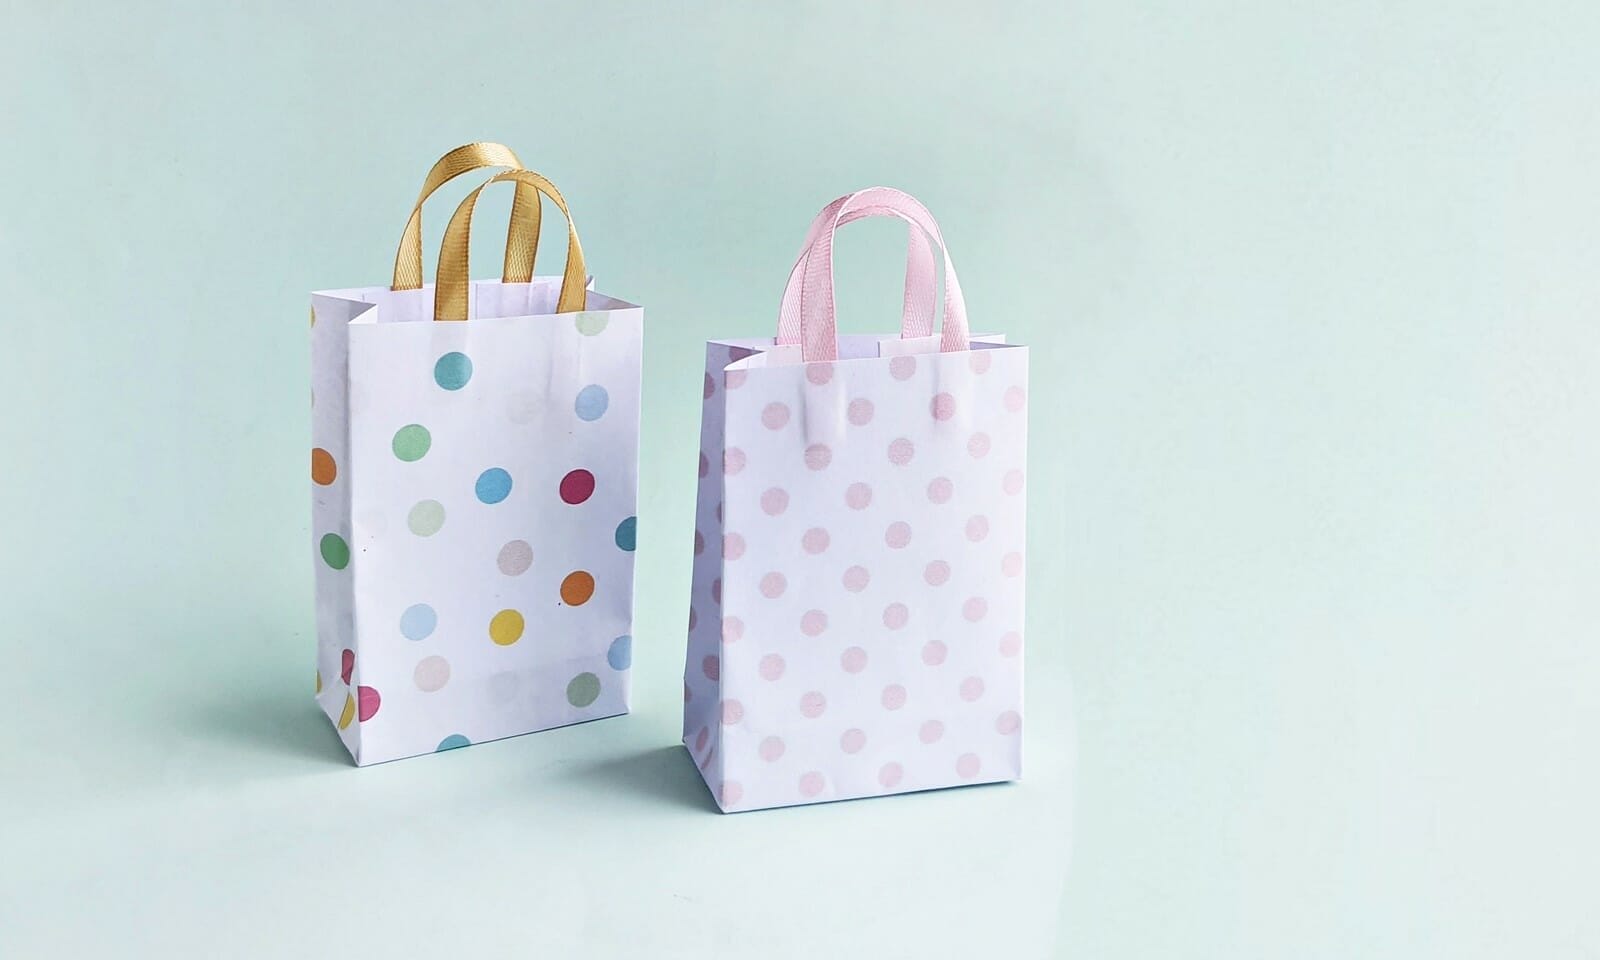 How to Make a Bag Out of Wrapping Paper: The Ultimate DIY Guide